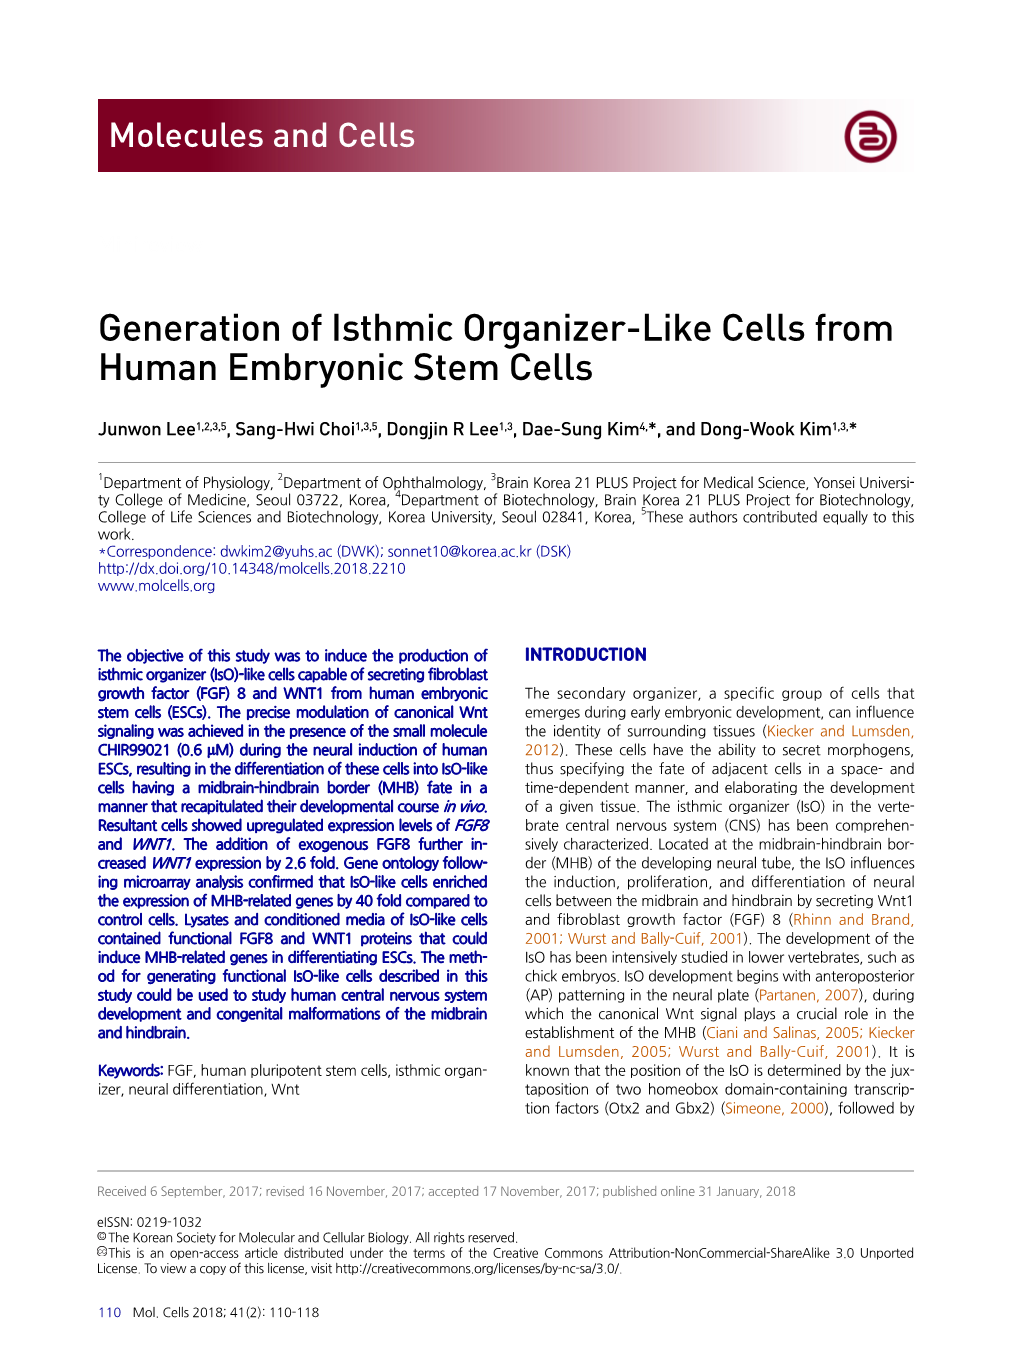 Generation of Isthmic Organizer-Like Cells from Human Embryonic Stem Cells